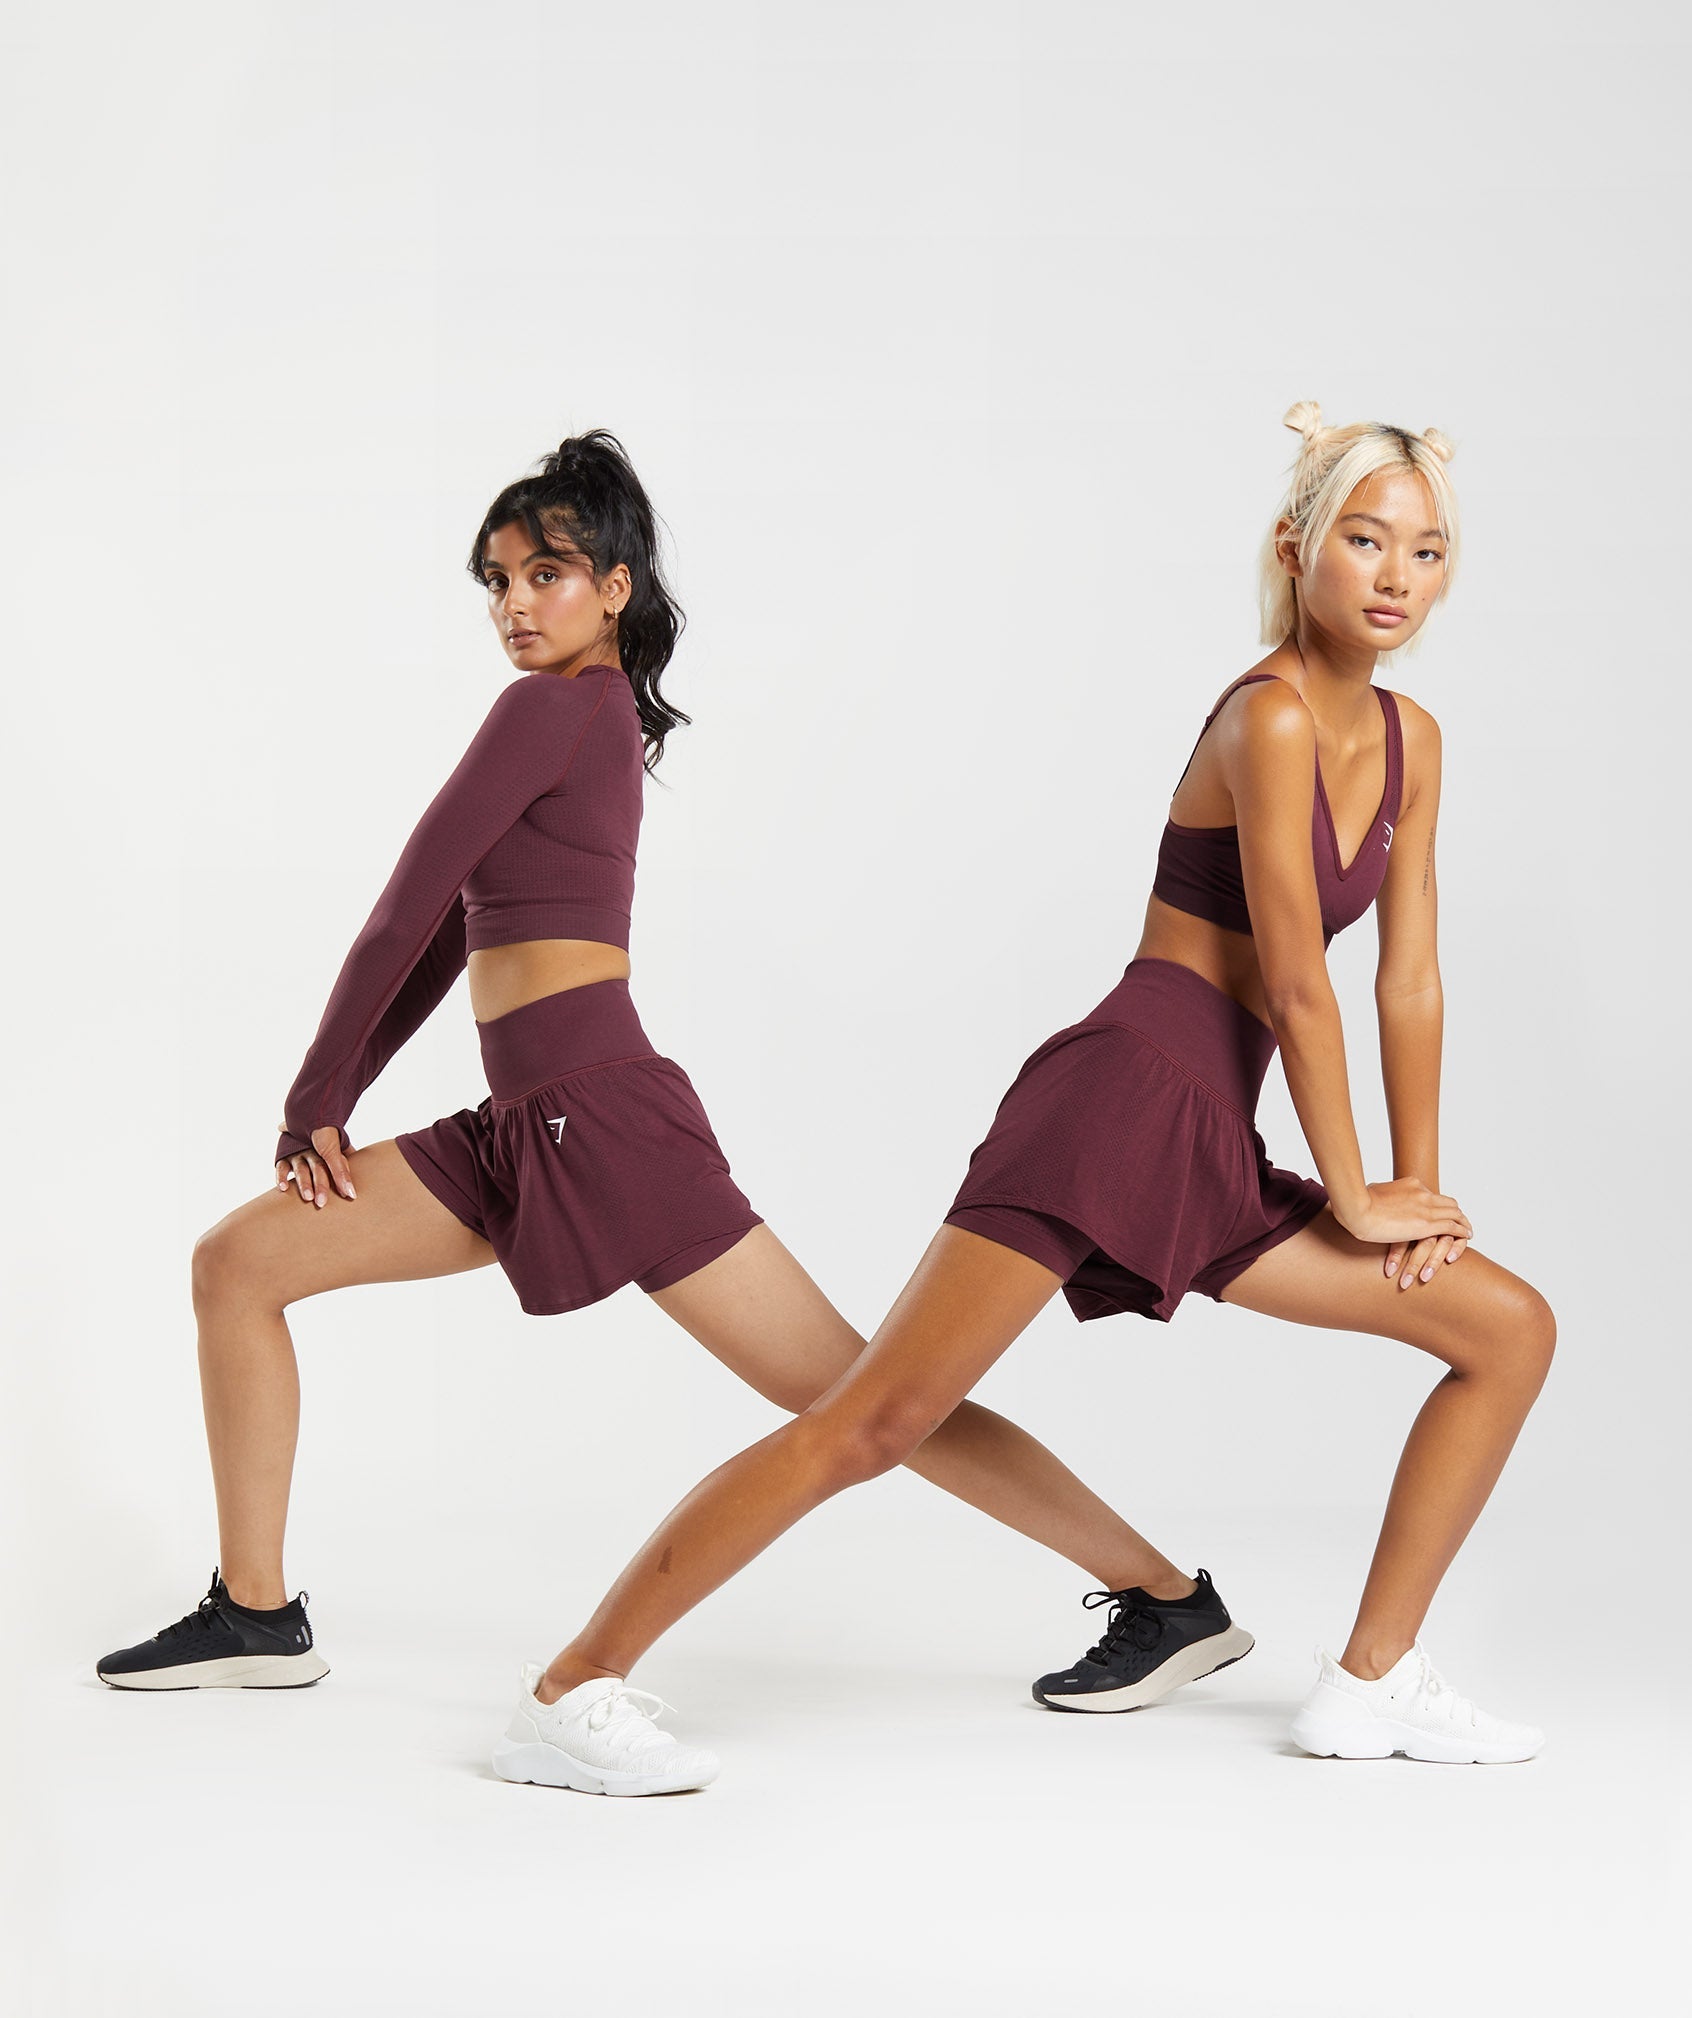 Vital Seamless 2.0 2-in-1 Shorts in Baked Maroon Marl